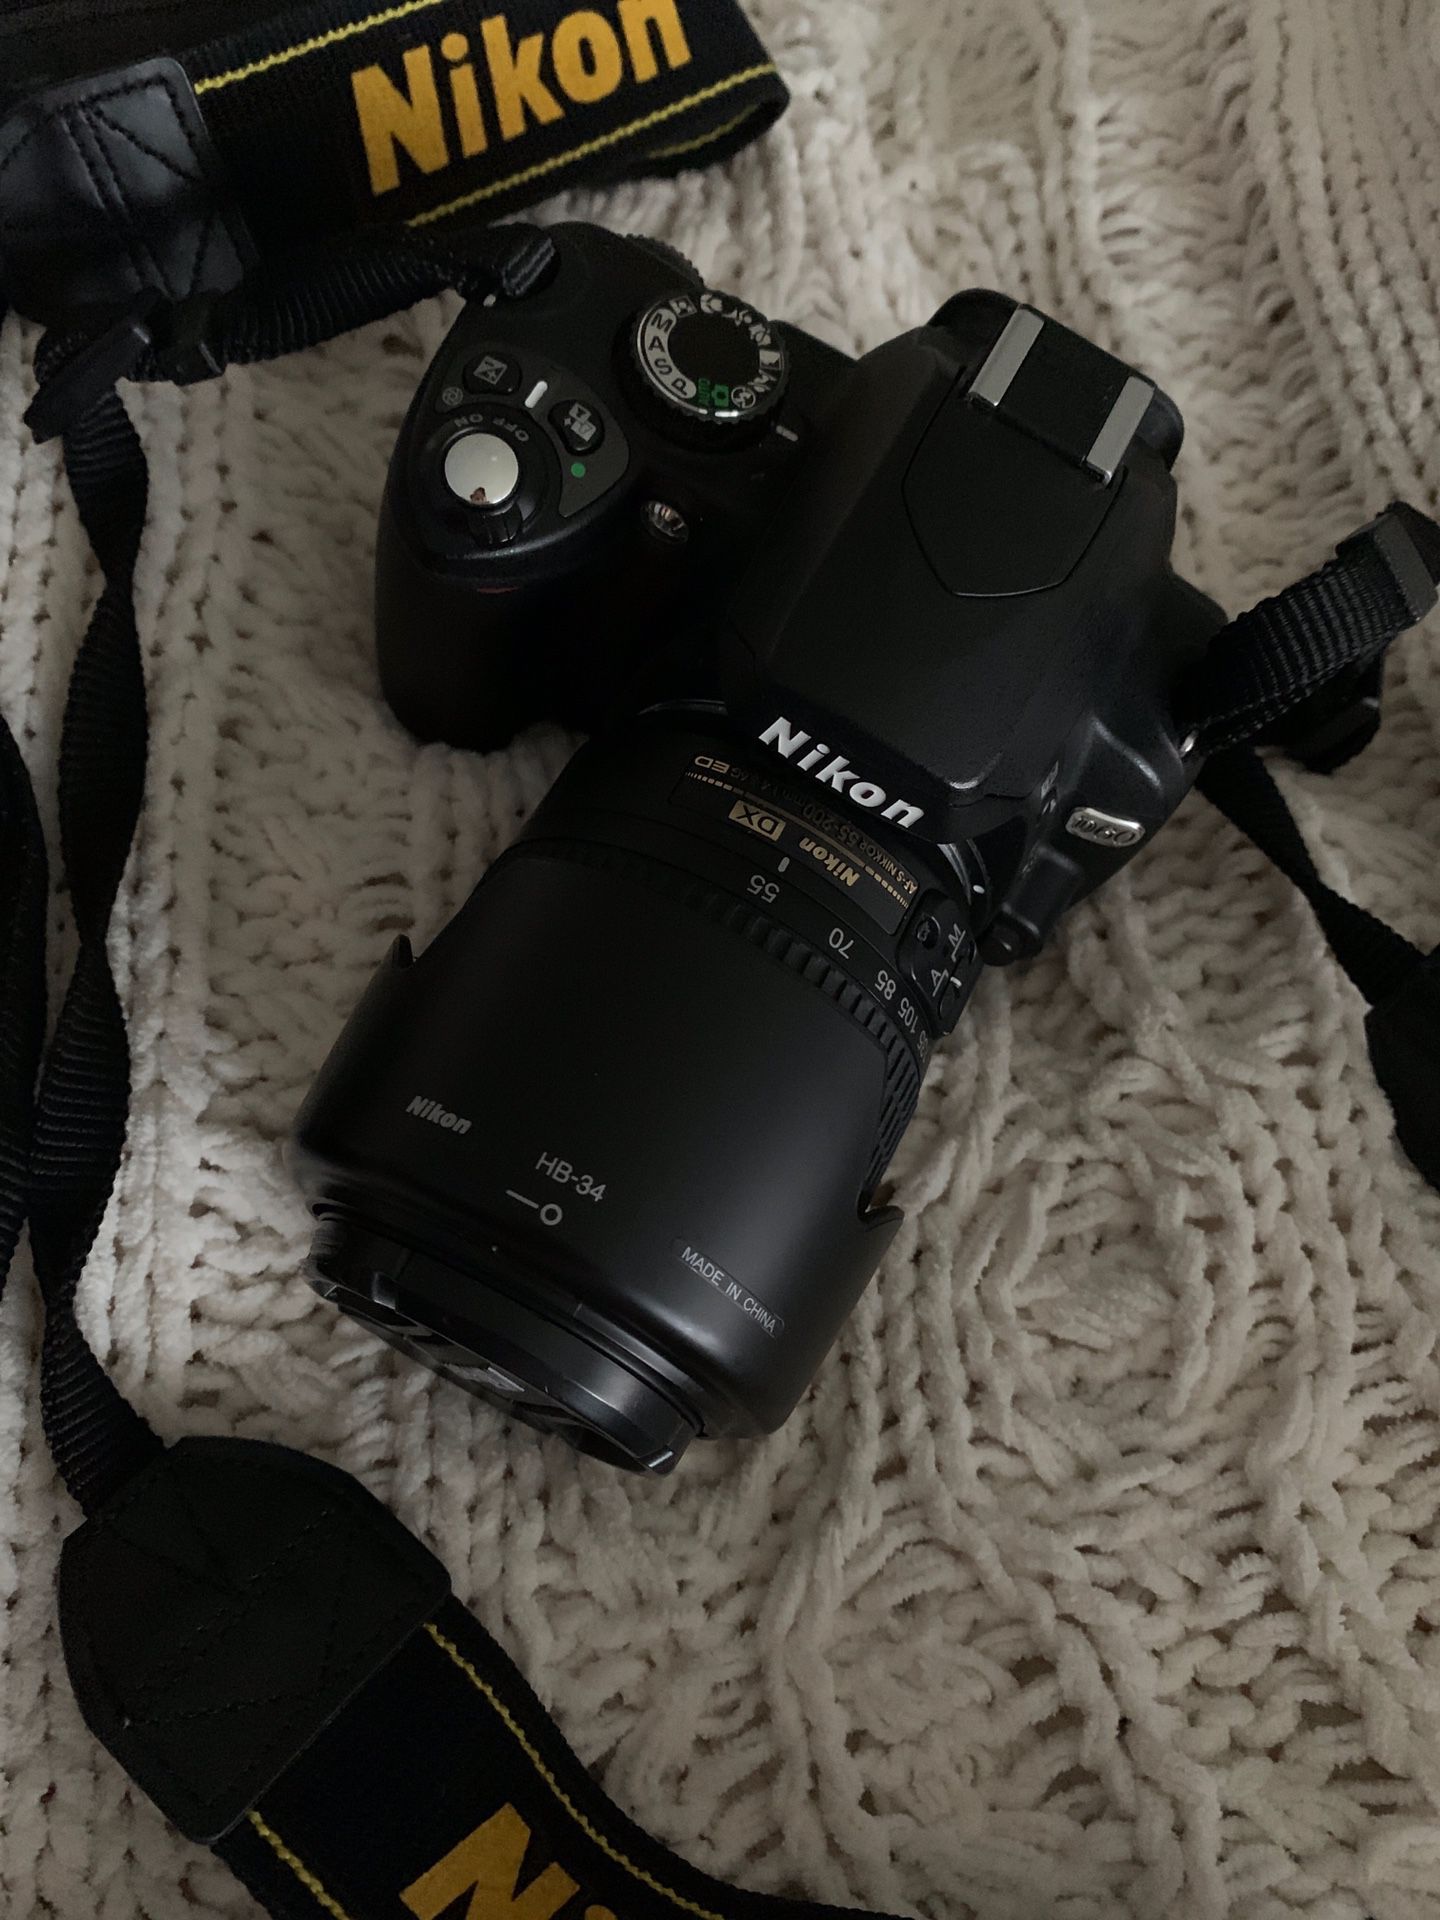 Nikon D60 with rechargeable battery and 55mm lens